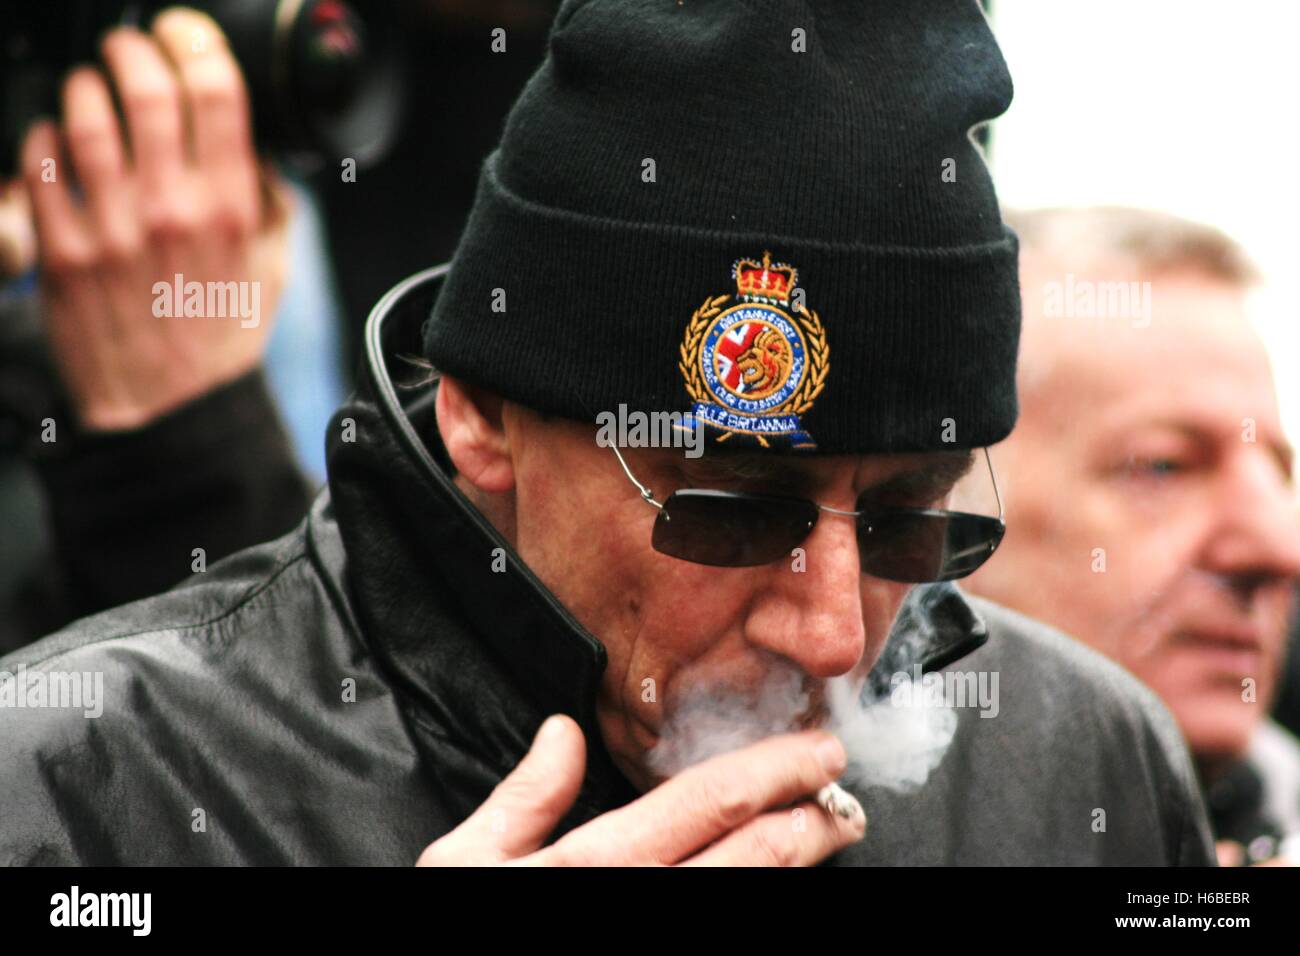 A member of Britain First inhales on a cigarette as the nationalist 'Christian vanguard' group protests on Piccadilly Circus - a counter movement to the anti-fascist march in London. Stock Photo